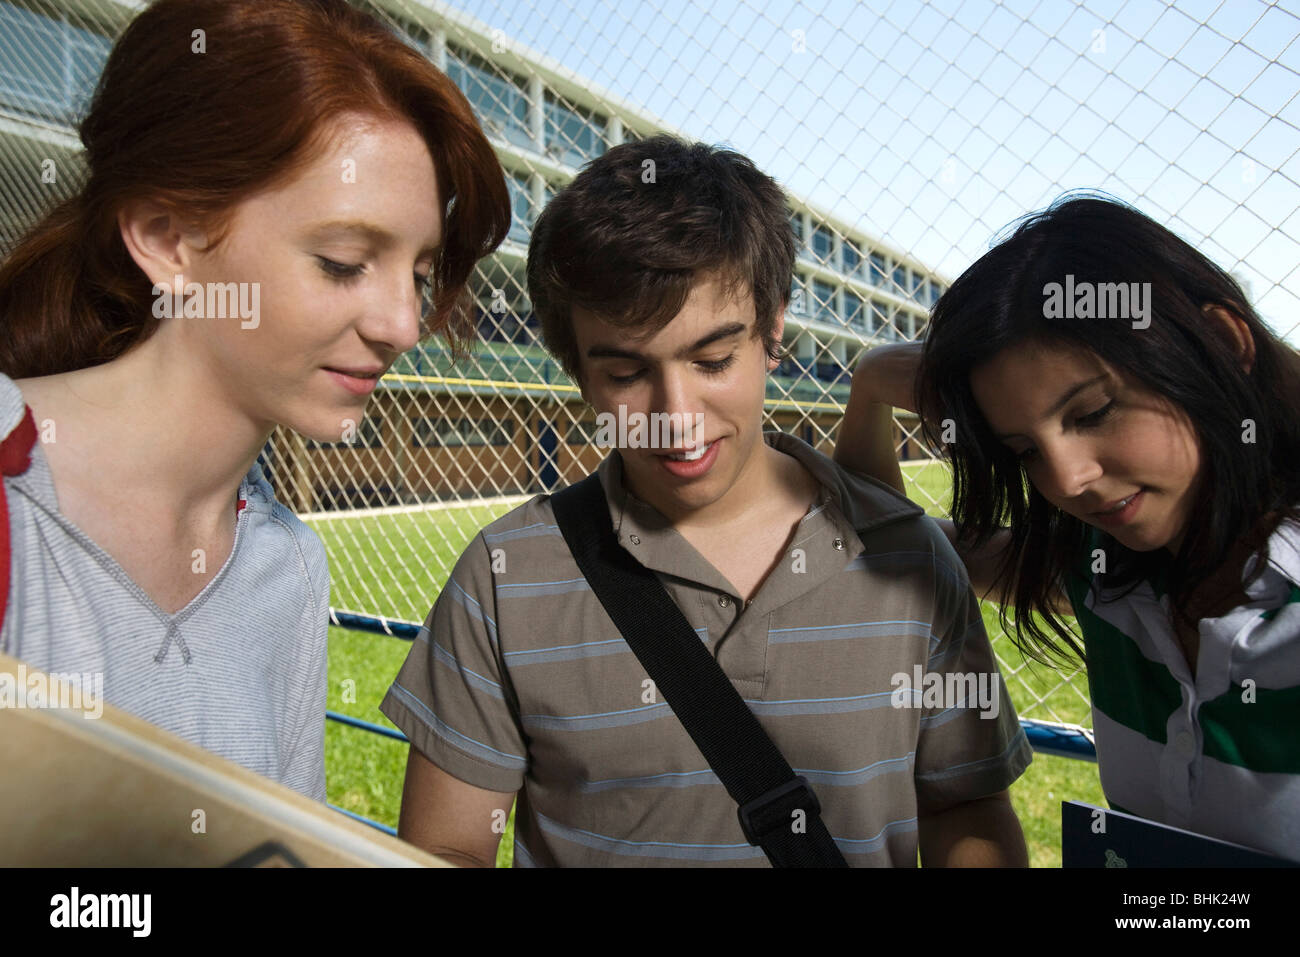 Teenage friends standing together chatting Stock Photo